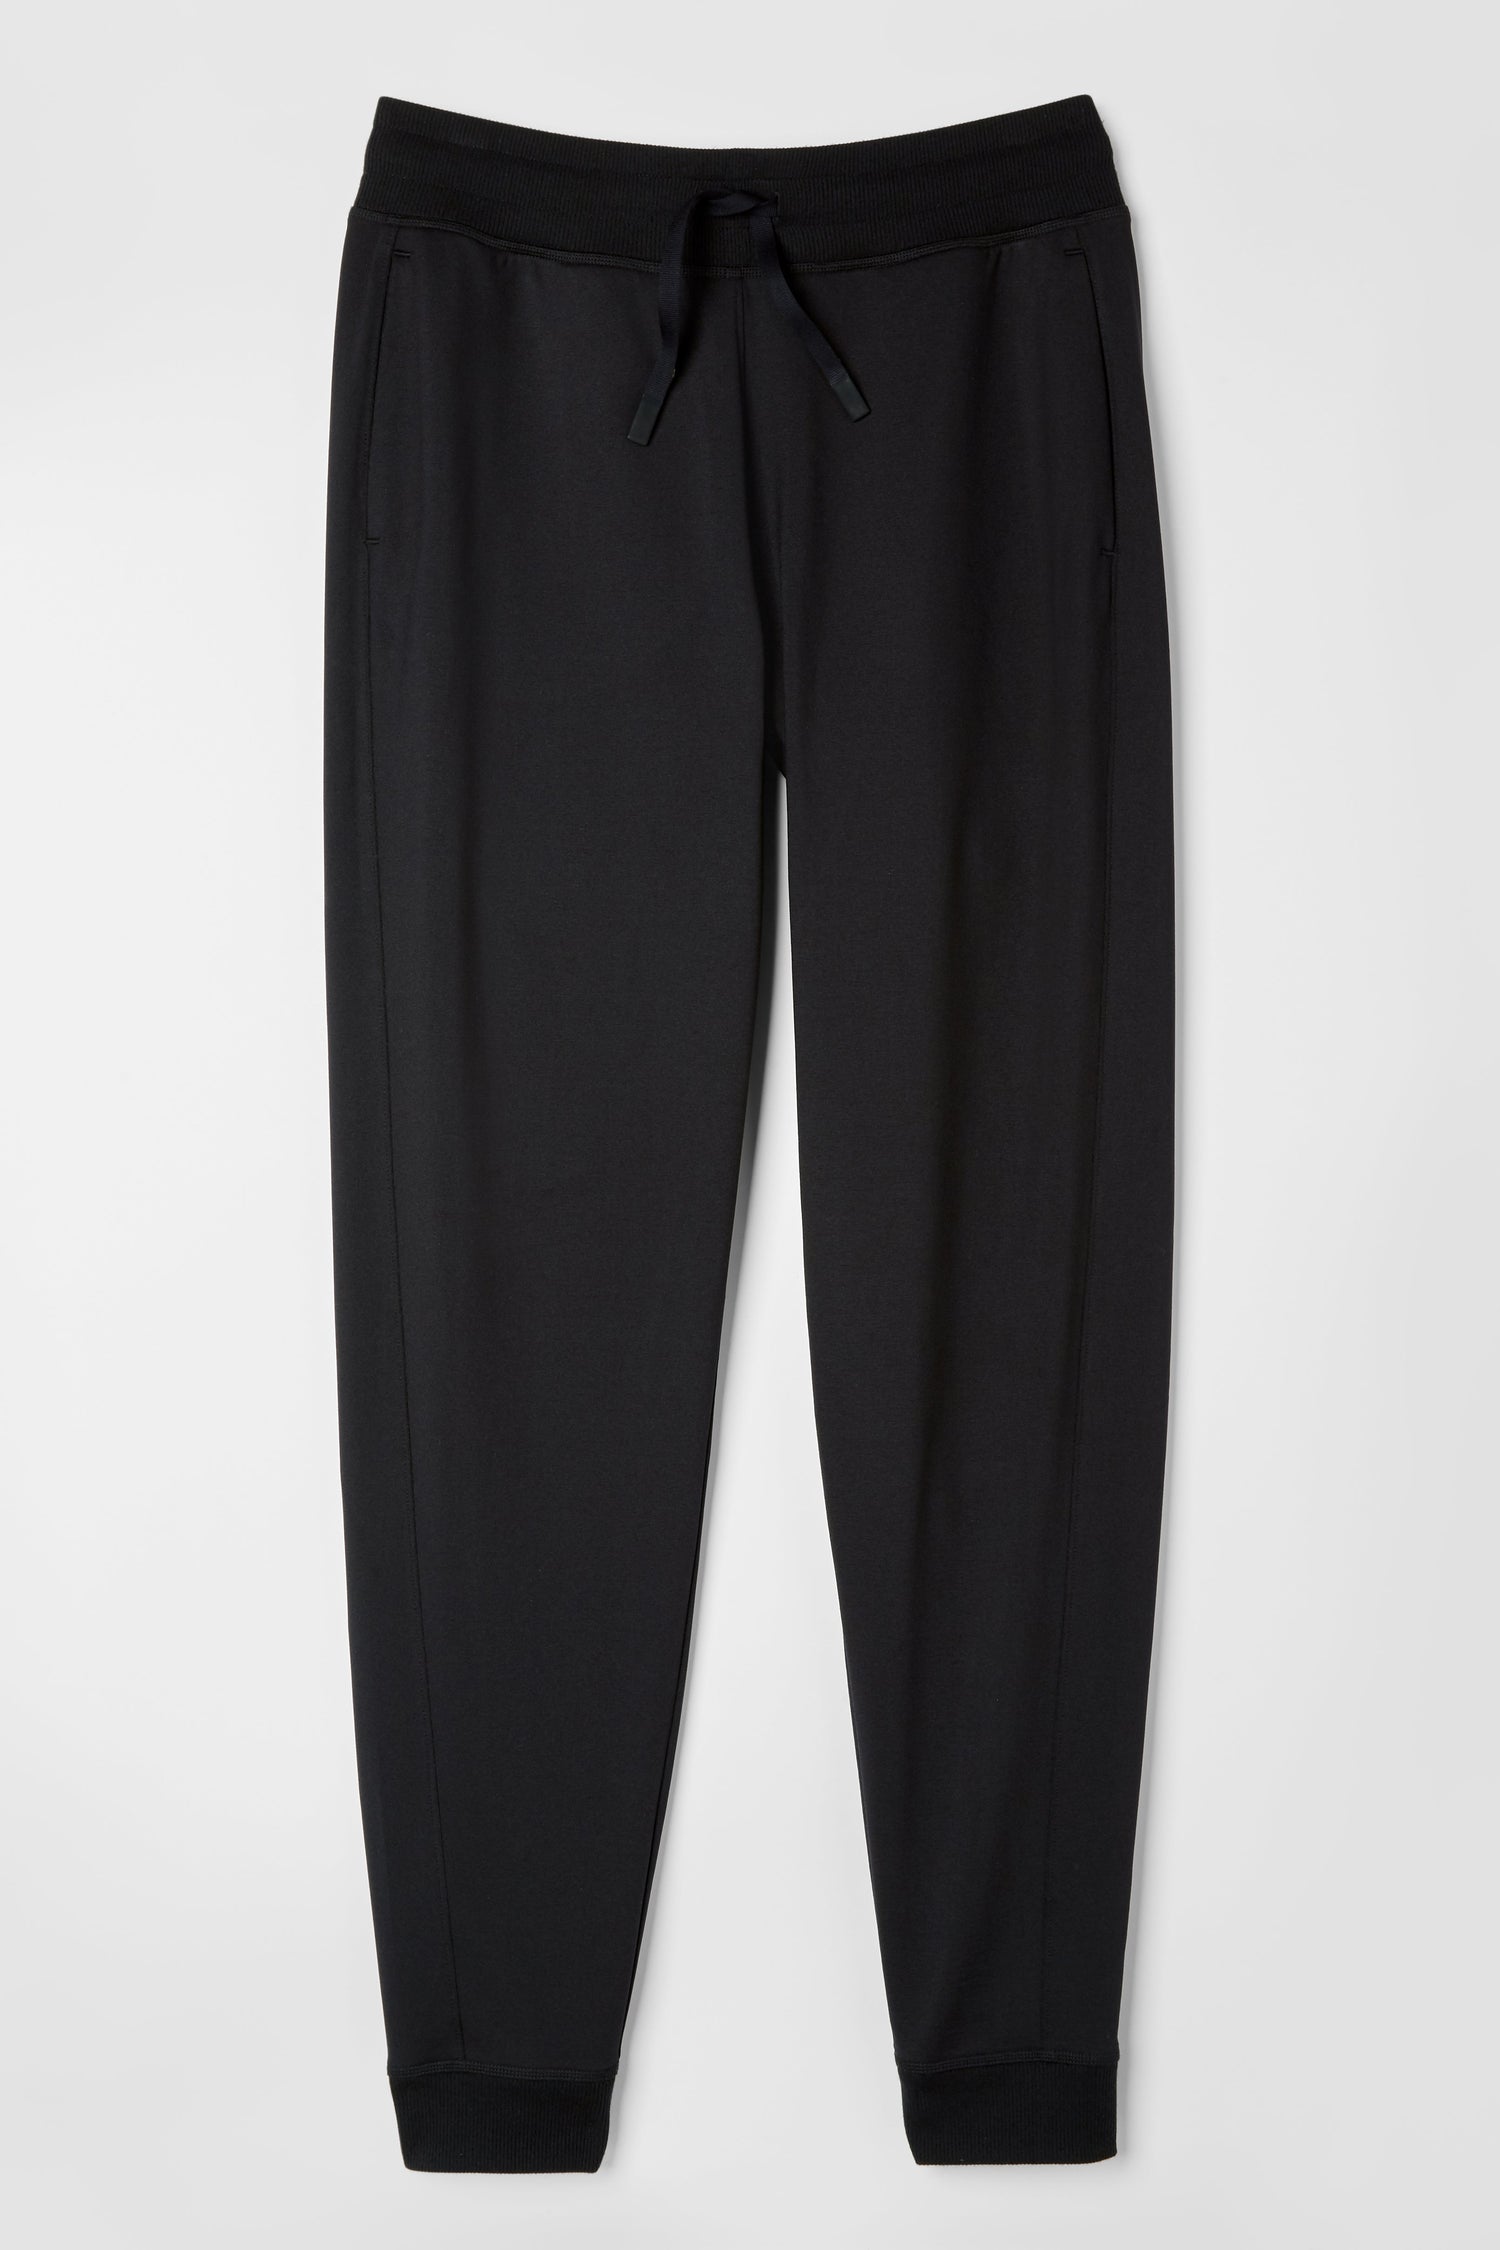 Black Jumpsuit Scrub With Front Button and Jogger Leg -  Canada